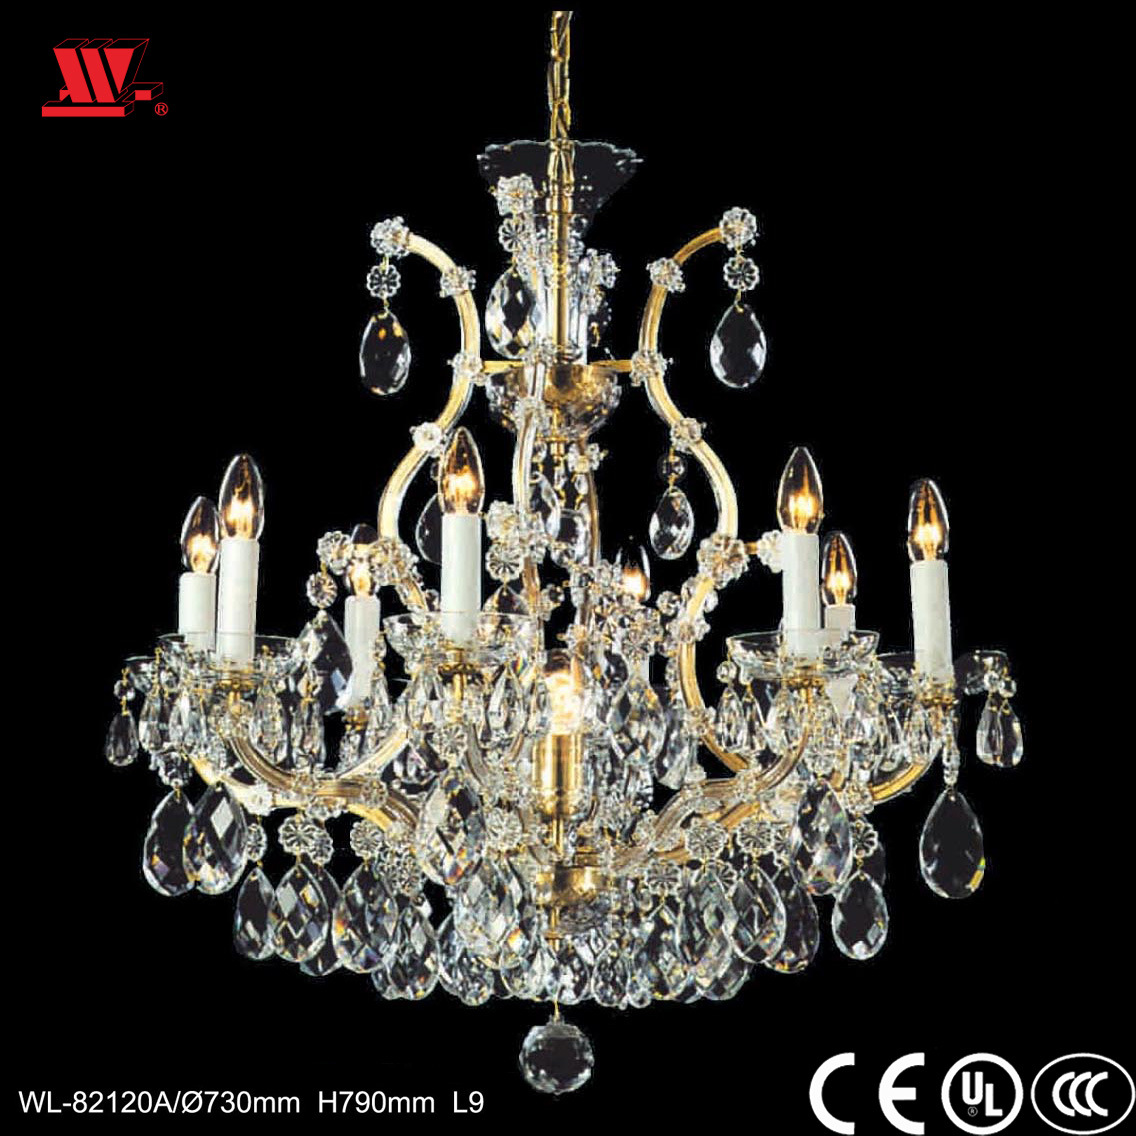 Traditional Crystal Chandelier with Glass Chains Wl-82120A